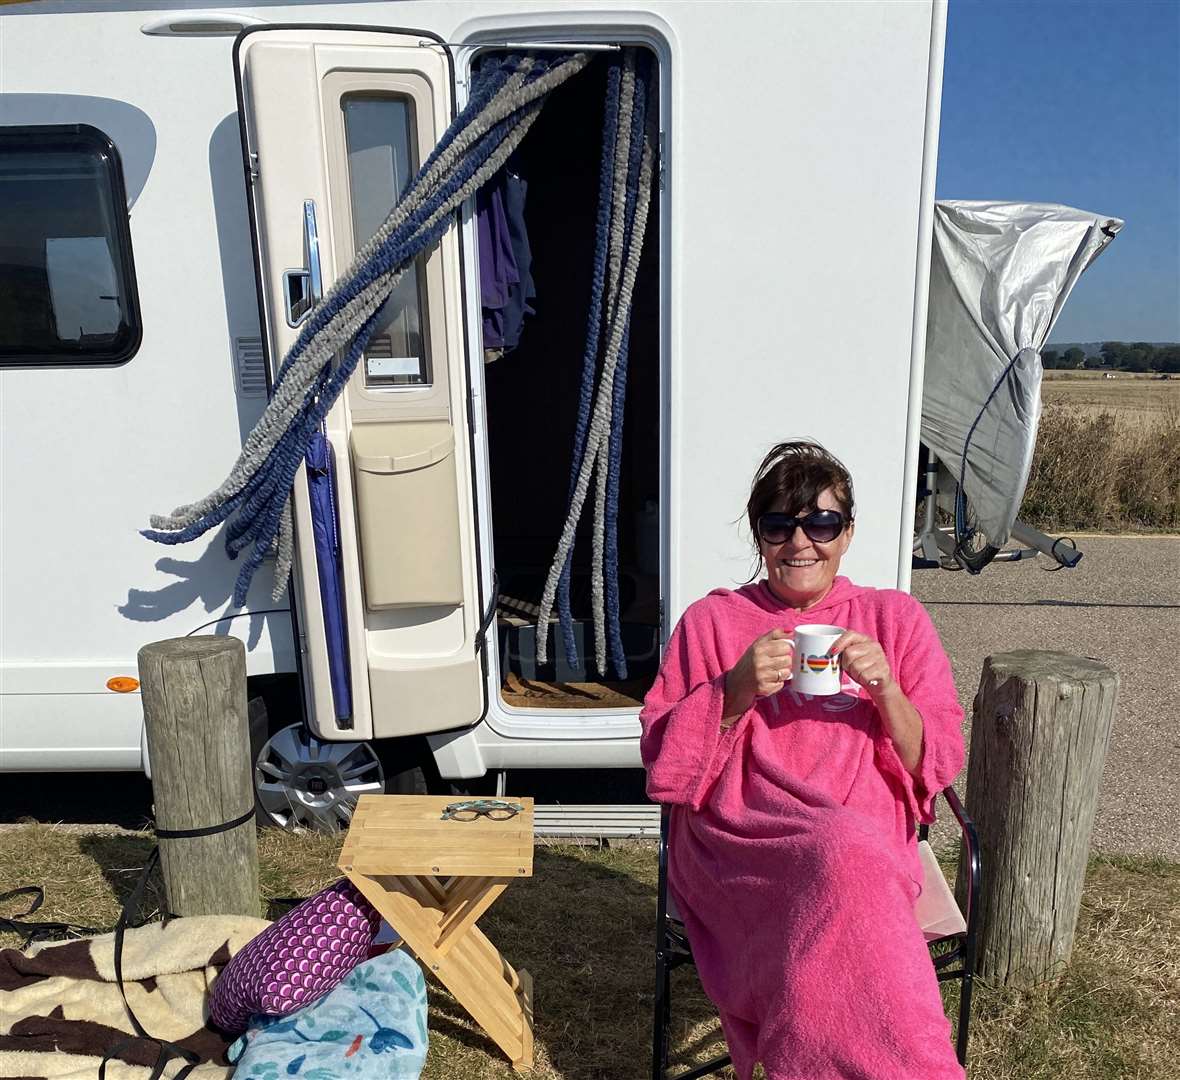 Siobhan has been travelling around the UK now for three years. Picture: Siobhan Daniels